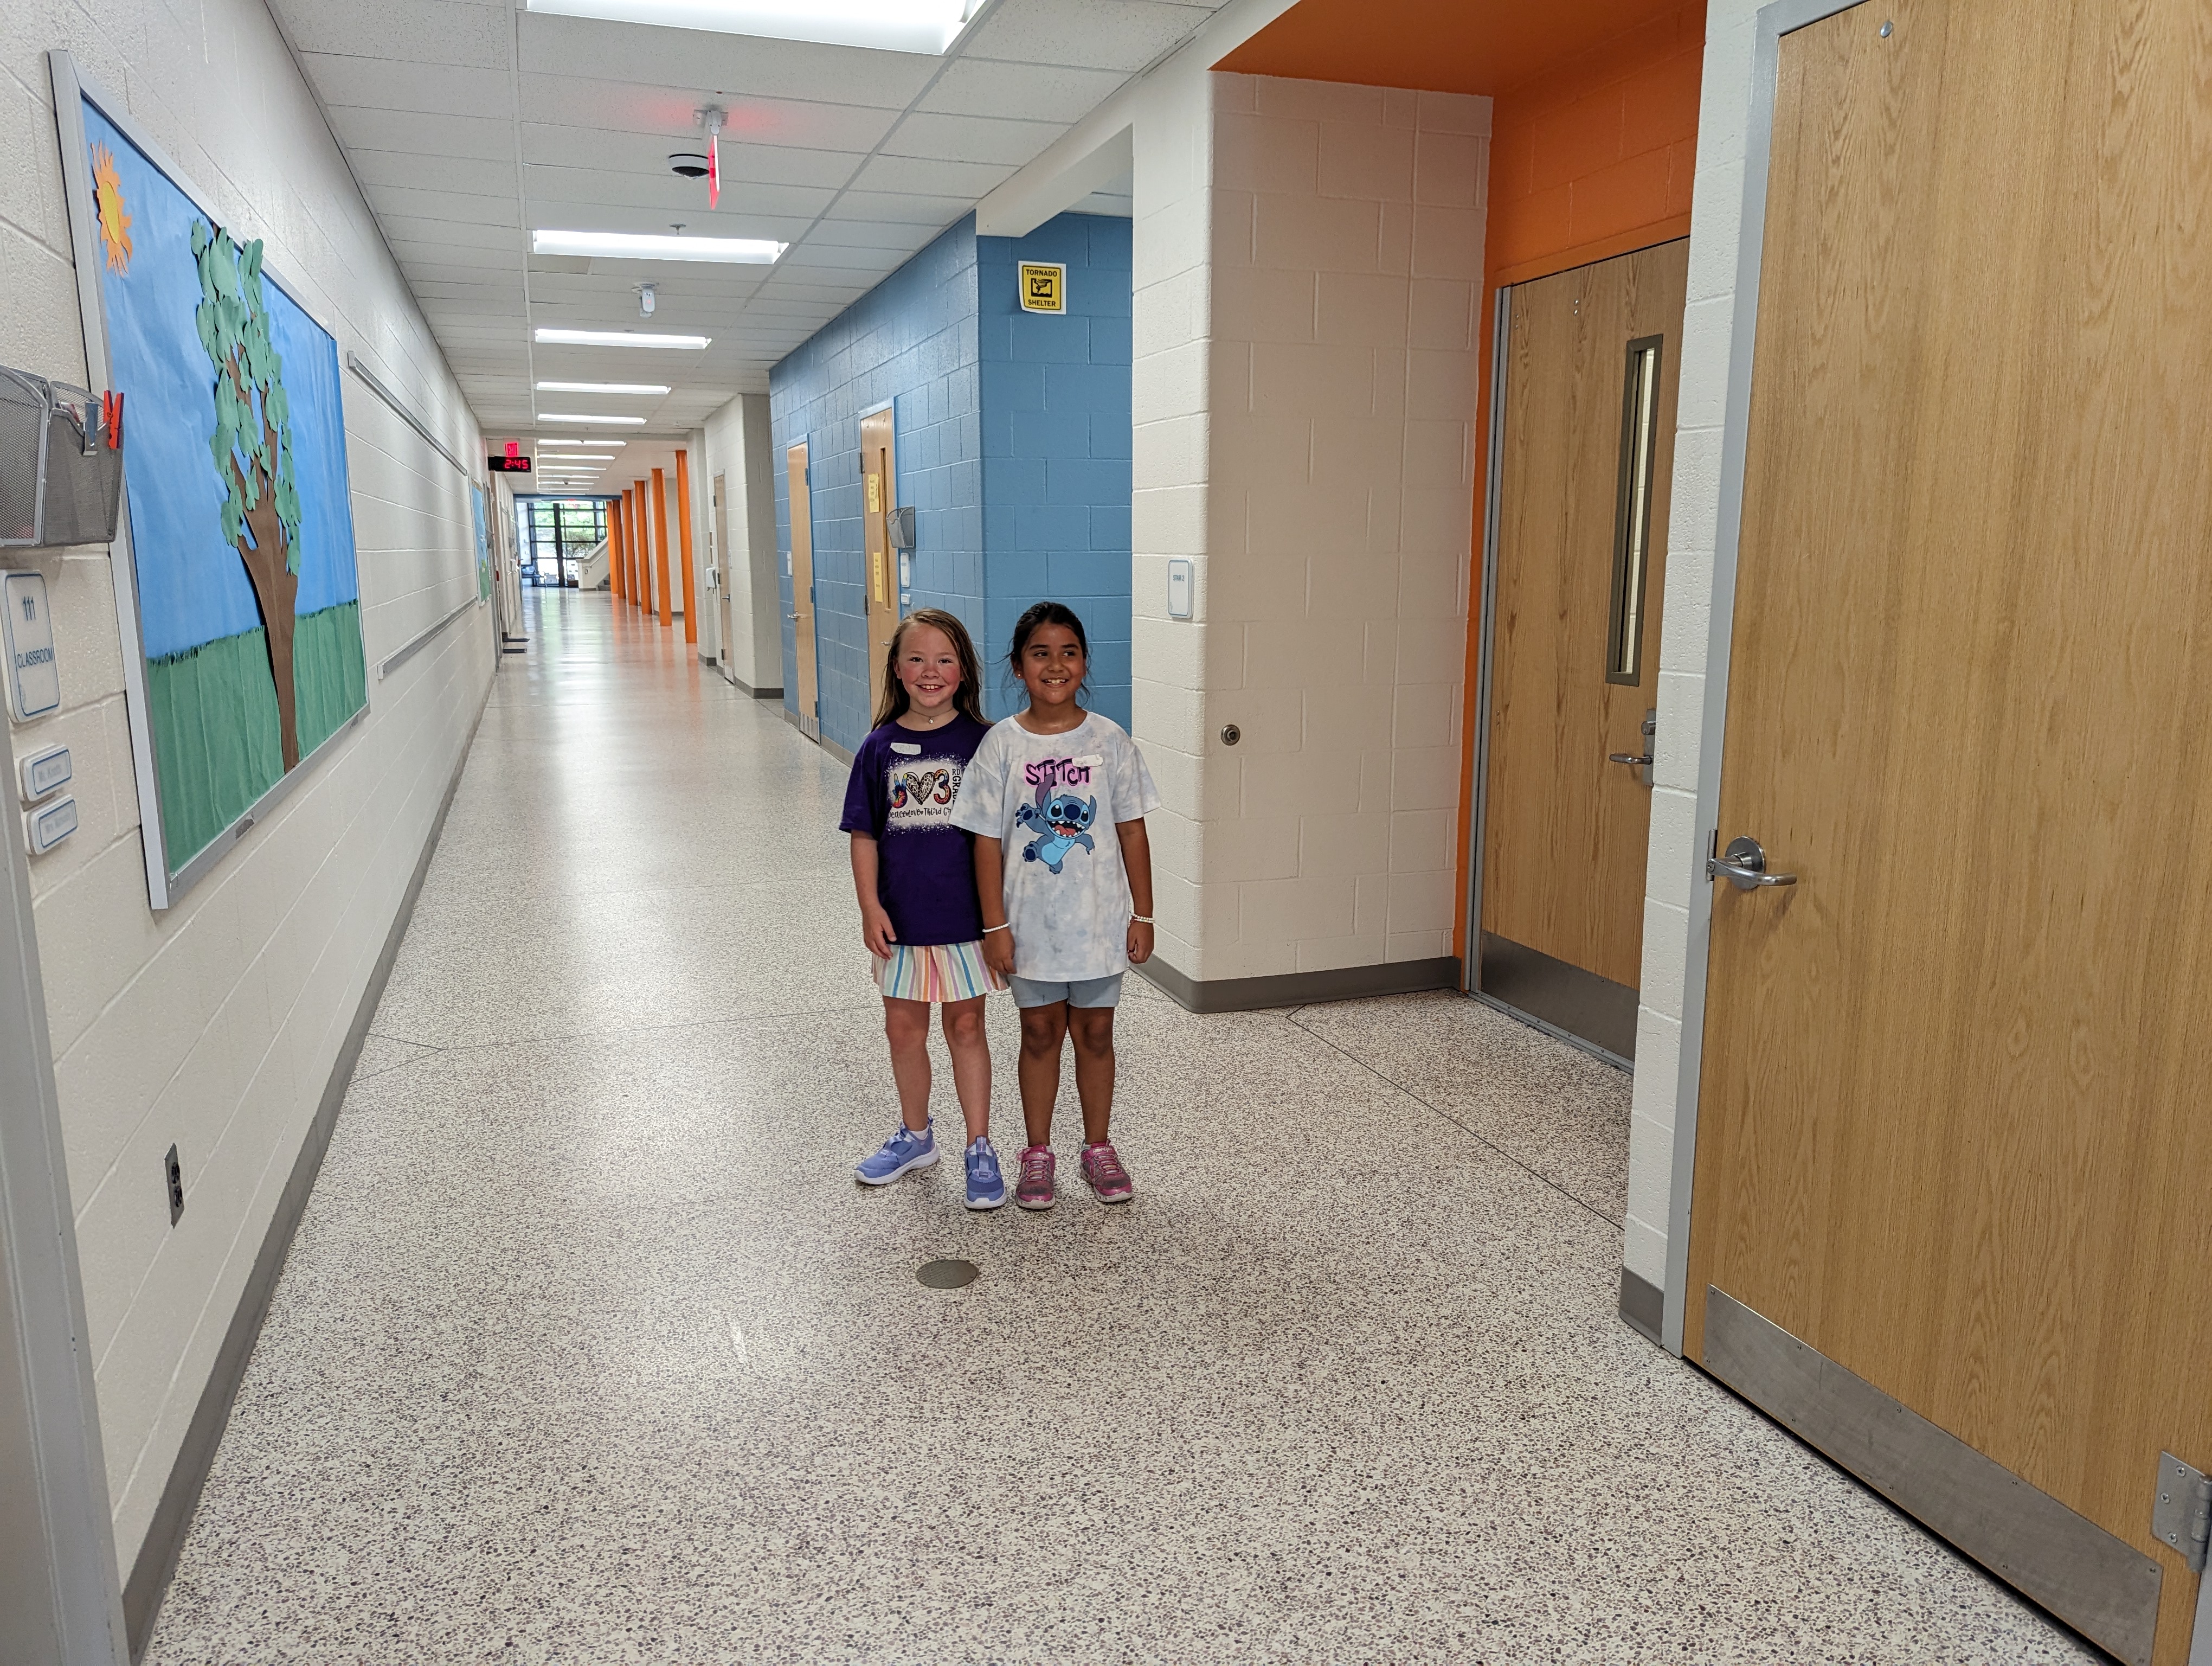 students in the hallway.